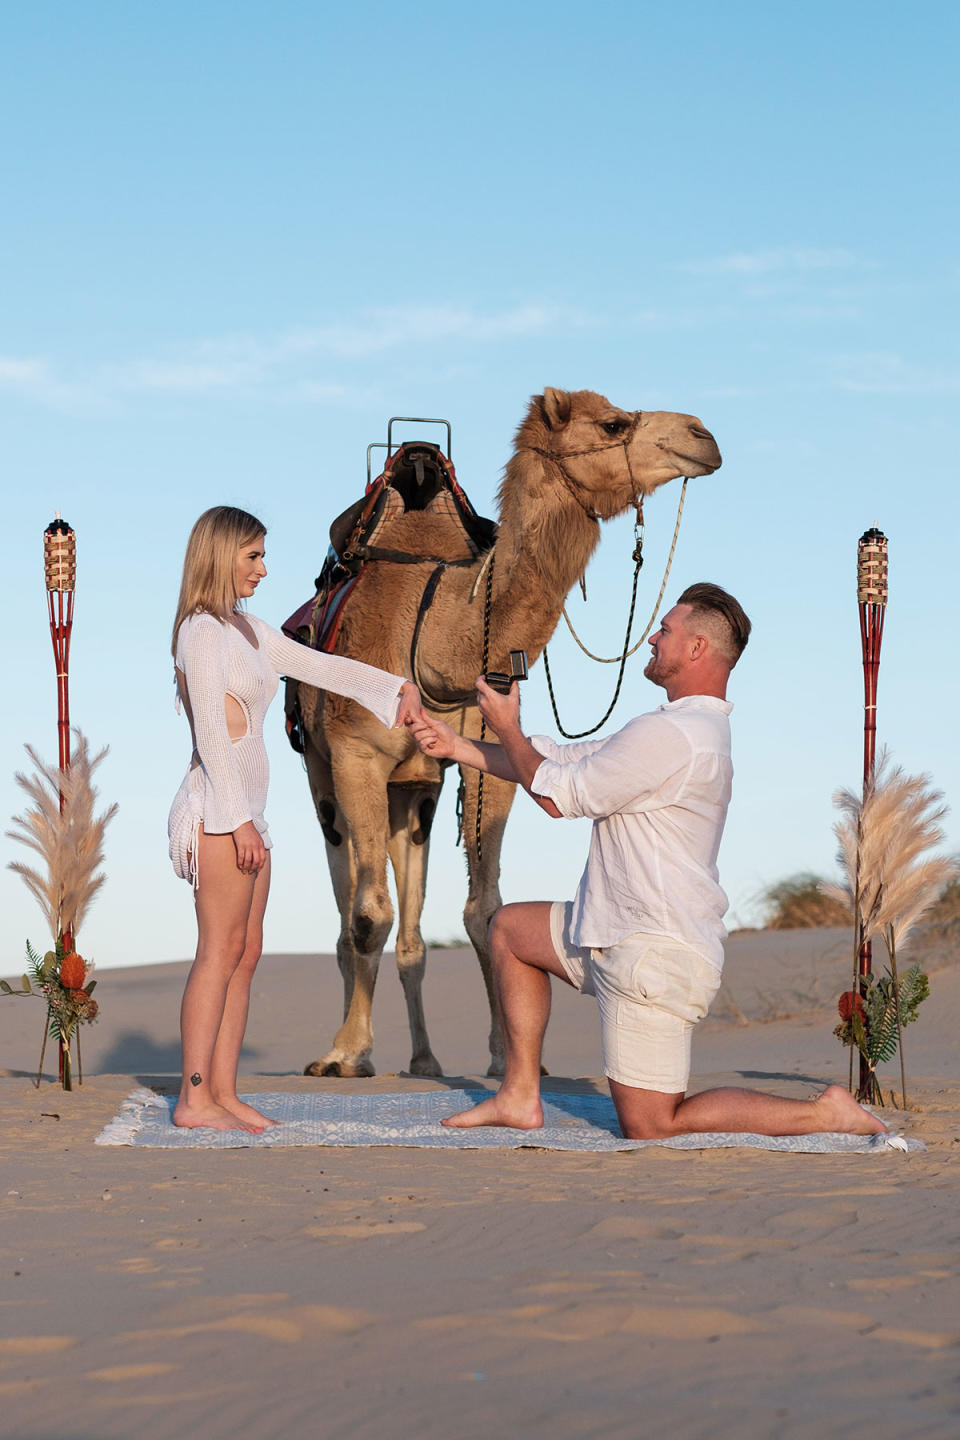 Dean Wells asks Aimee Woolley to be his wife with a camel in front of them